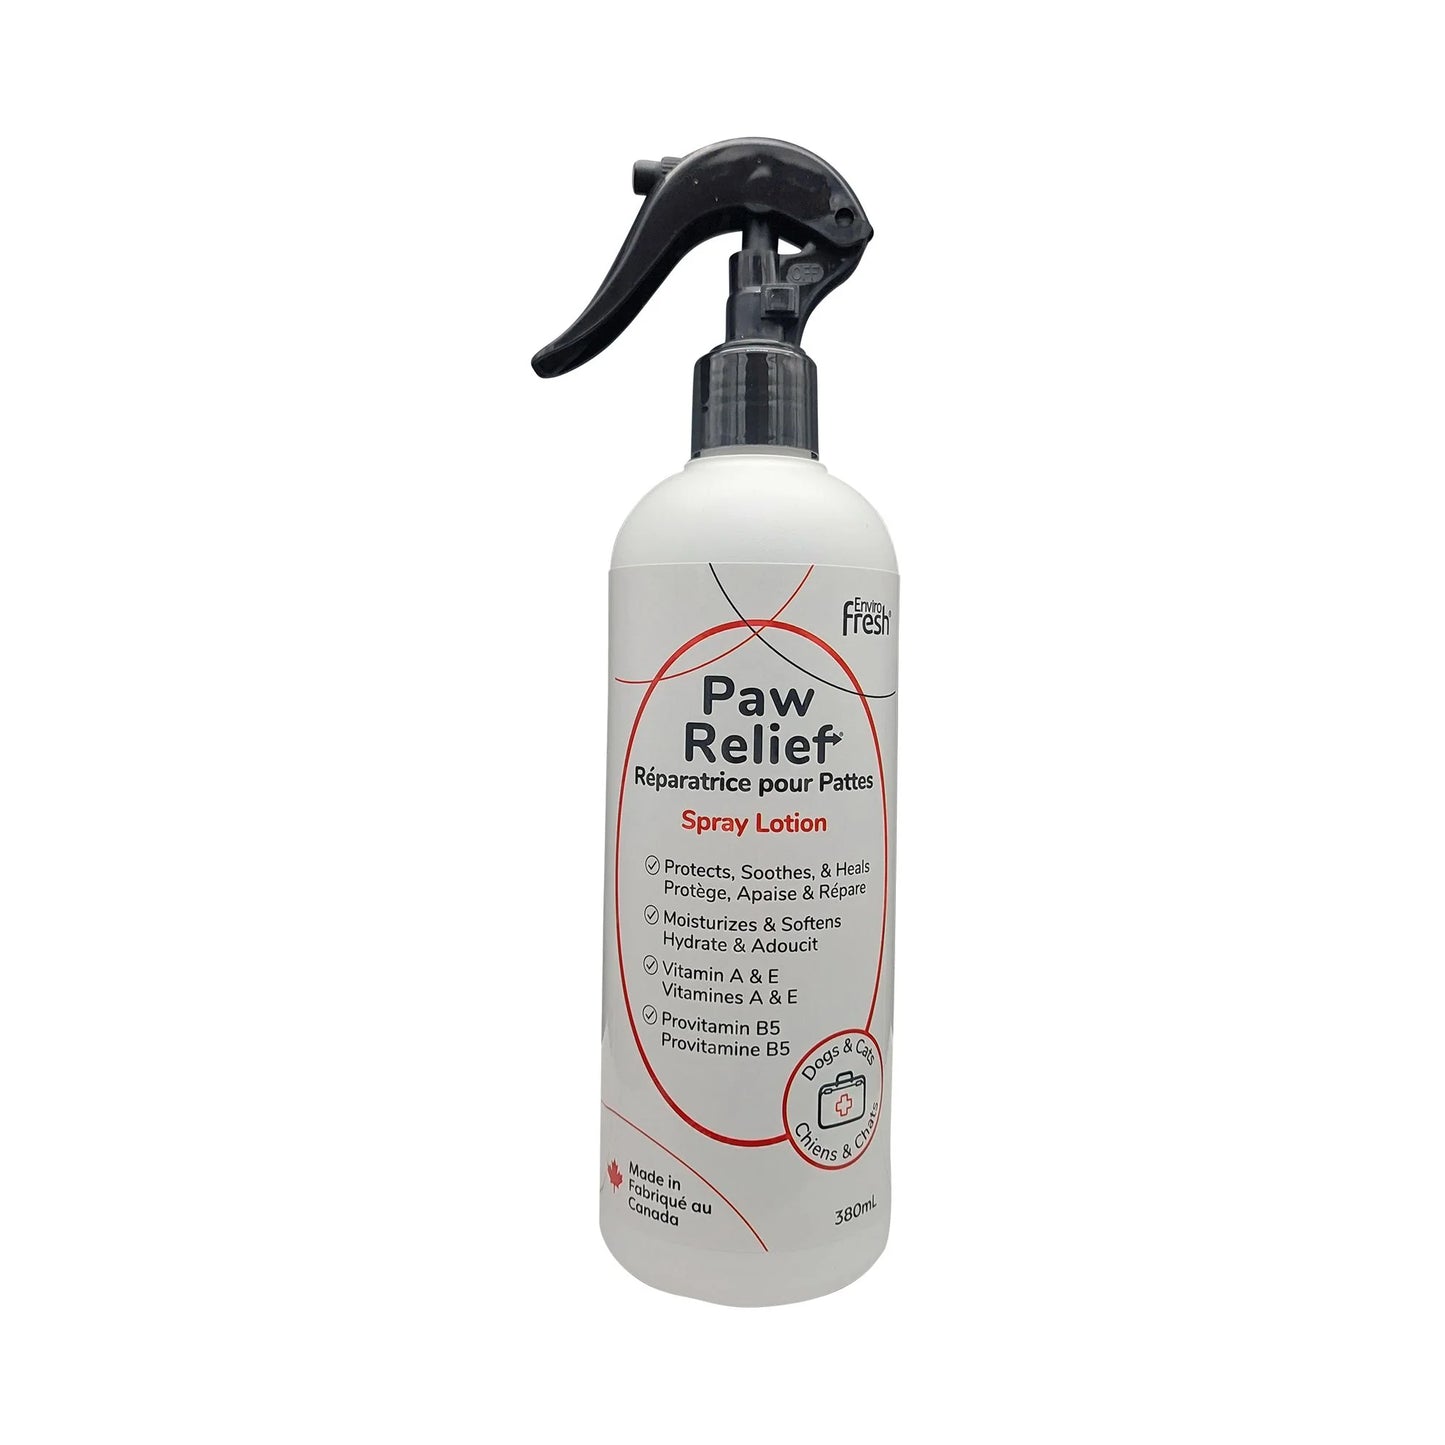 Enviro fresh 3 in 1 Paw Spray Protects Soothes & Heals 380ml